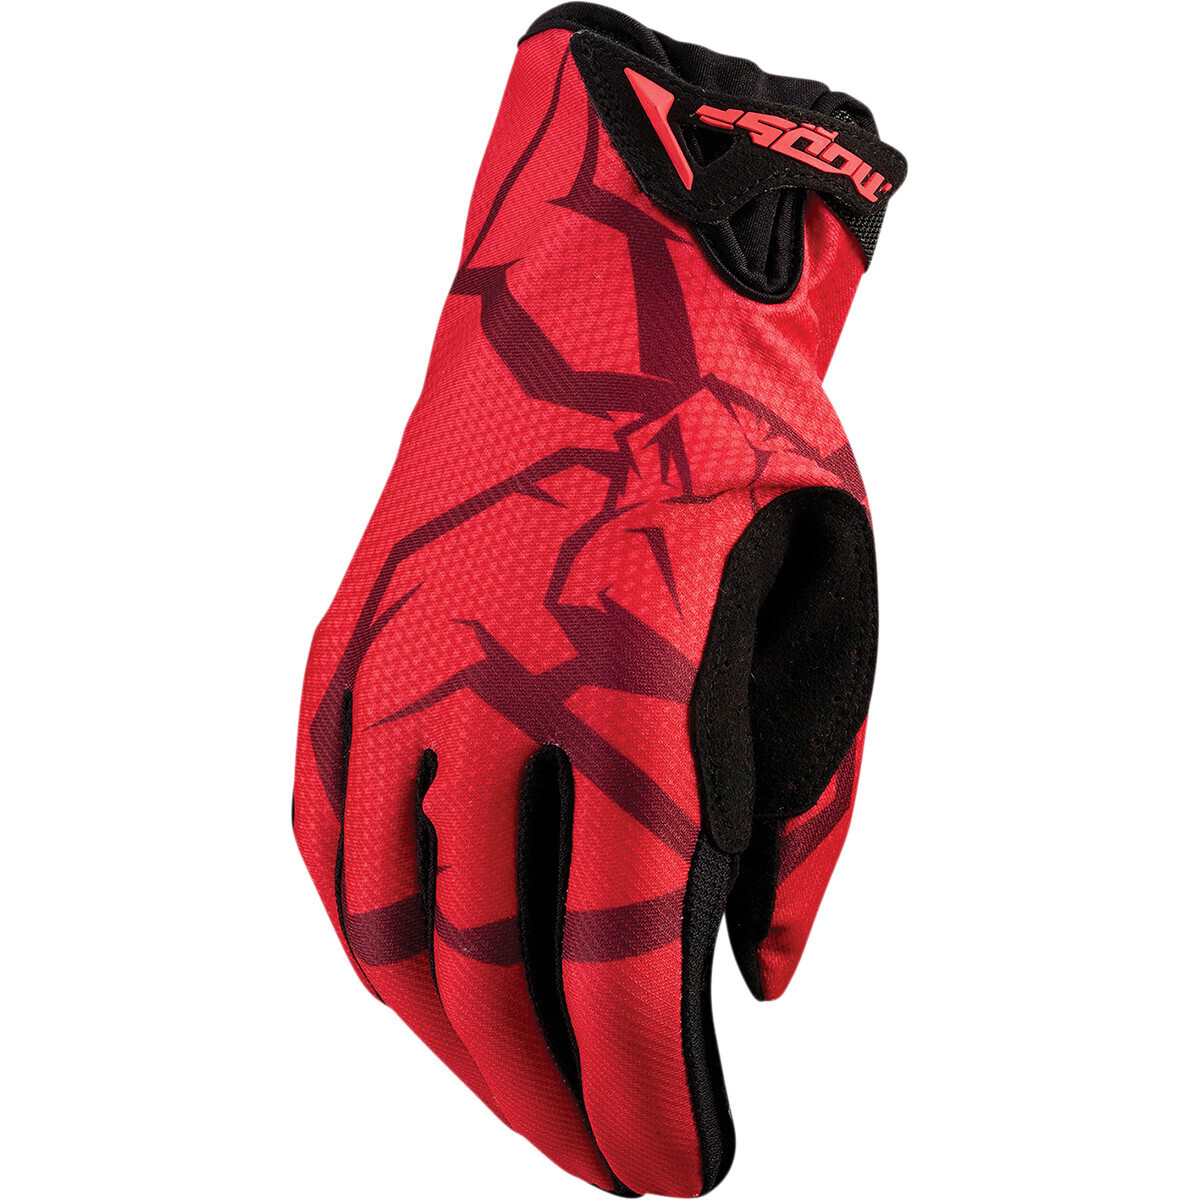 MOOSE RACING SOFT-GOODS
GLOVE AGROID PRO RD